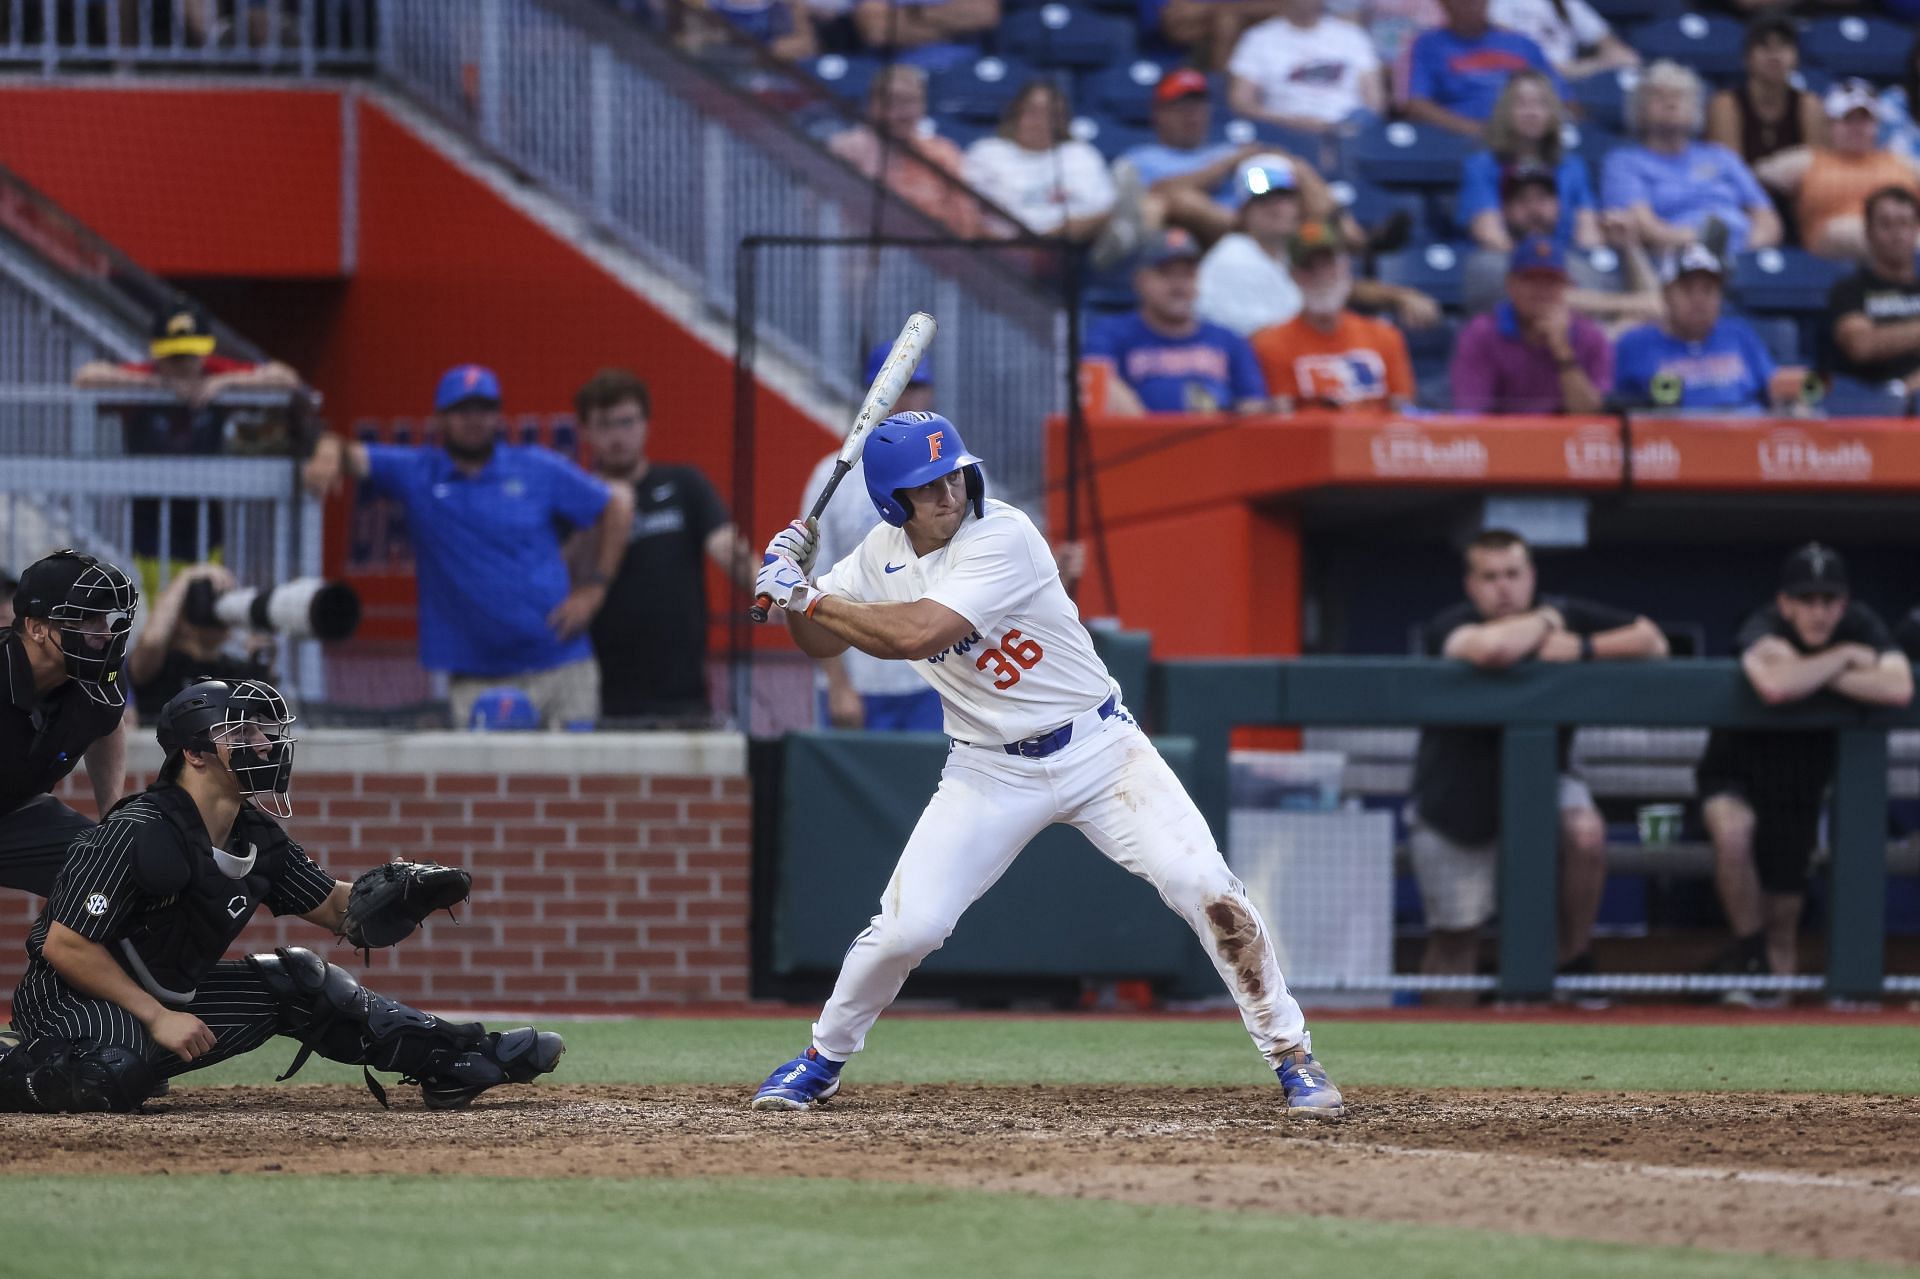 Florida has been clutch all CWS